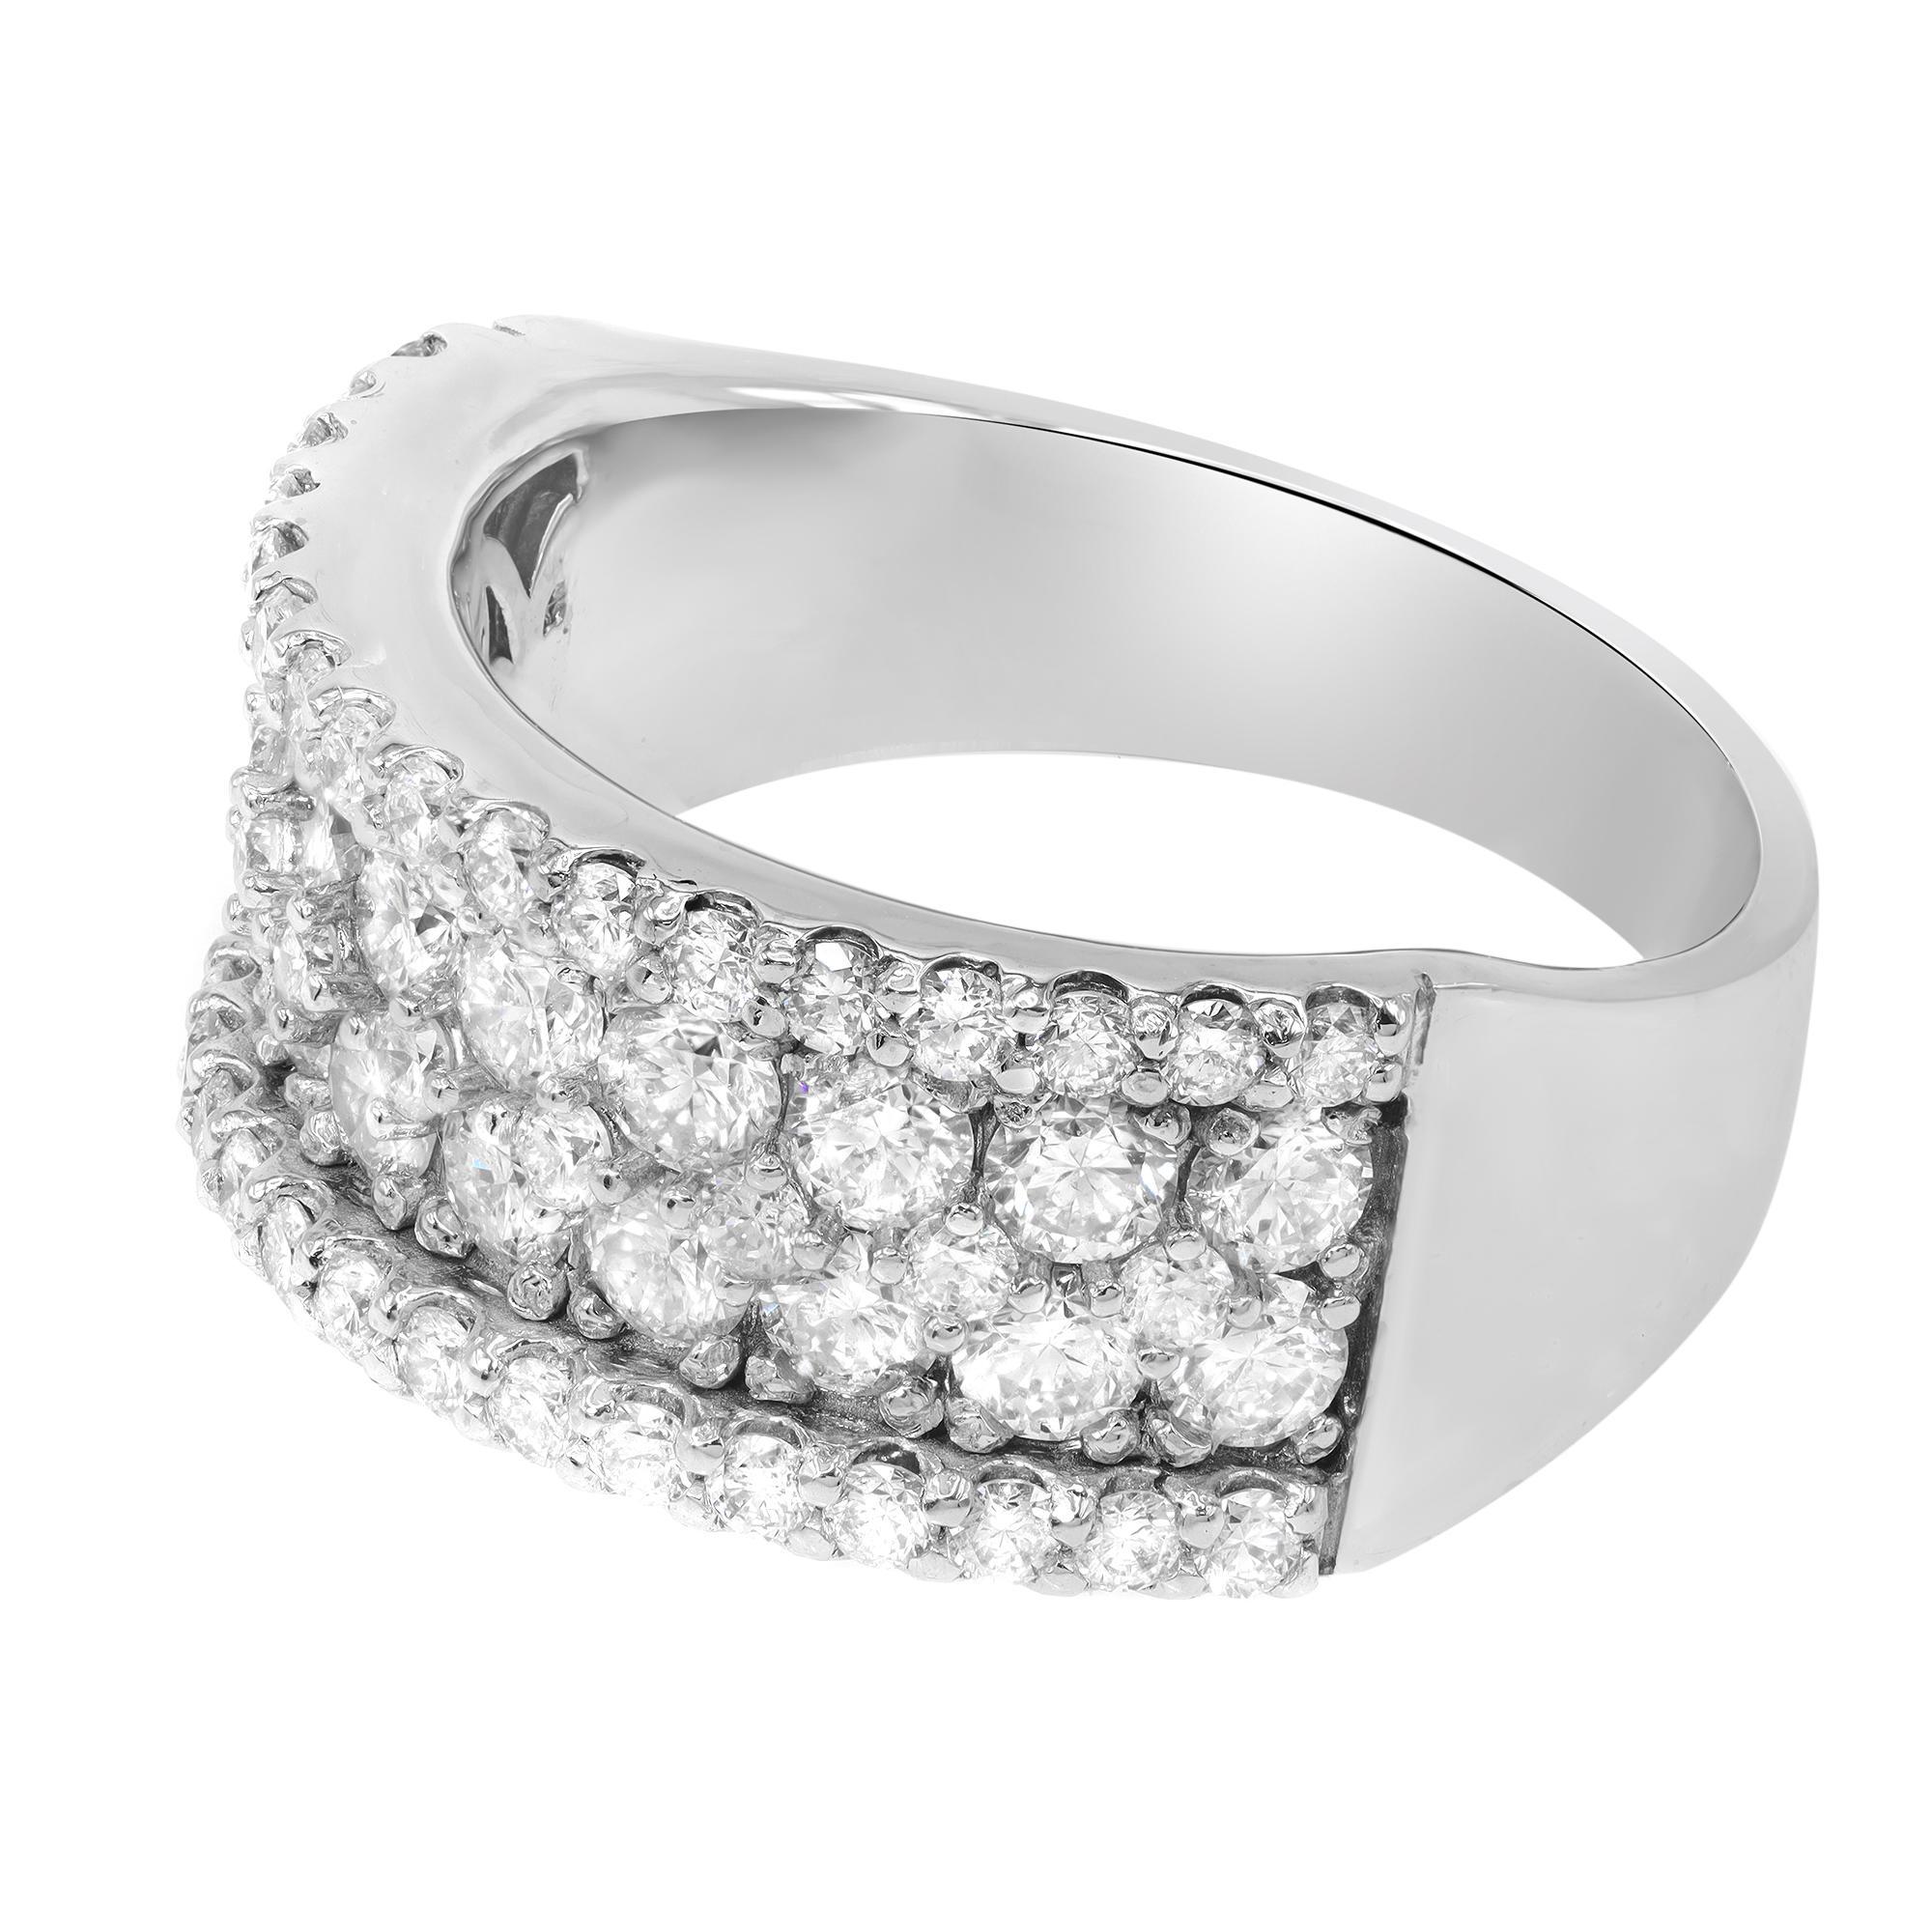 Dazzling rows of round diamonds adorn this stylish concave broad ring, crafted in 14k white gold. Set with 2.15cttw of round cut diamonds. Diamond color G and VS clarity. Width of the ring 9.30mm. Ring size 6.75. Comes with a presentable gift box